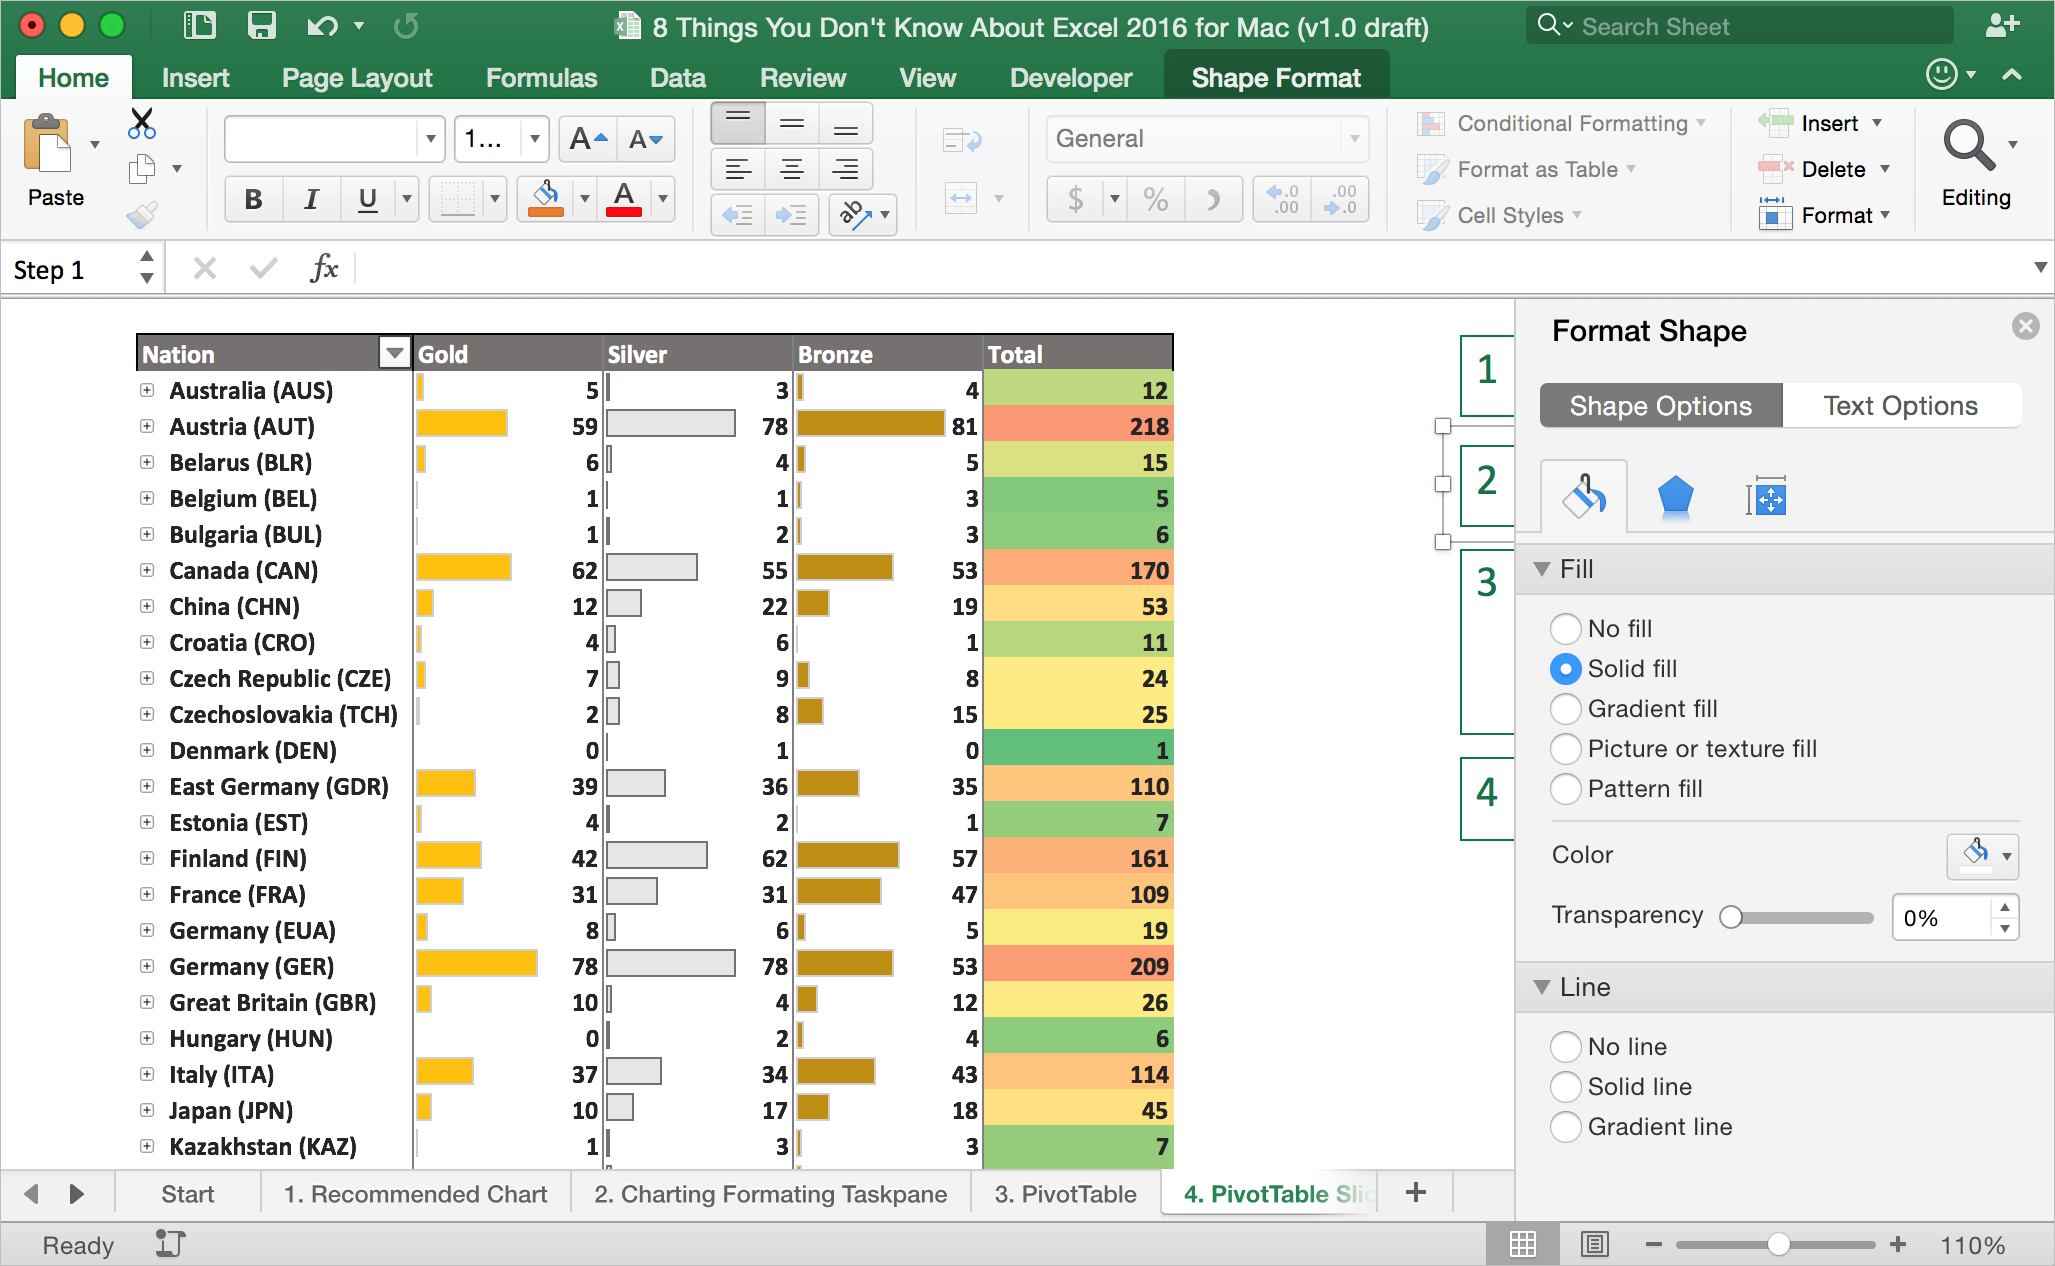 8 Tips And Tricks You Should Know For Excel 2016 For Mac - Microsoft and Sample Of Excel Spreadsheet With Data